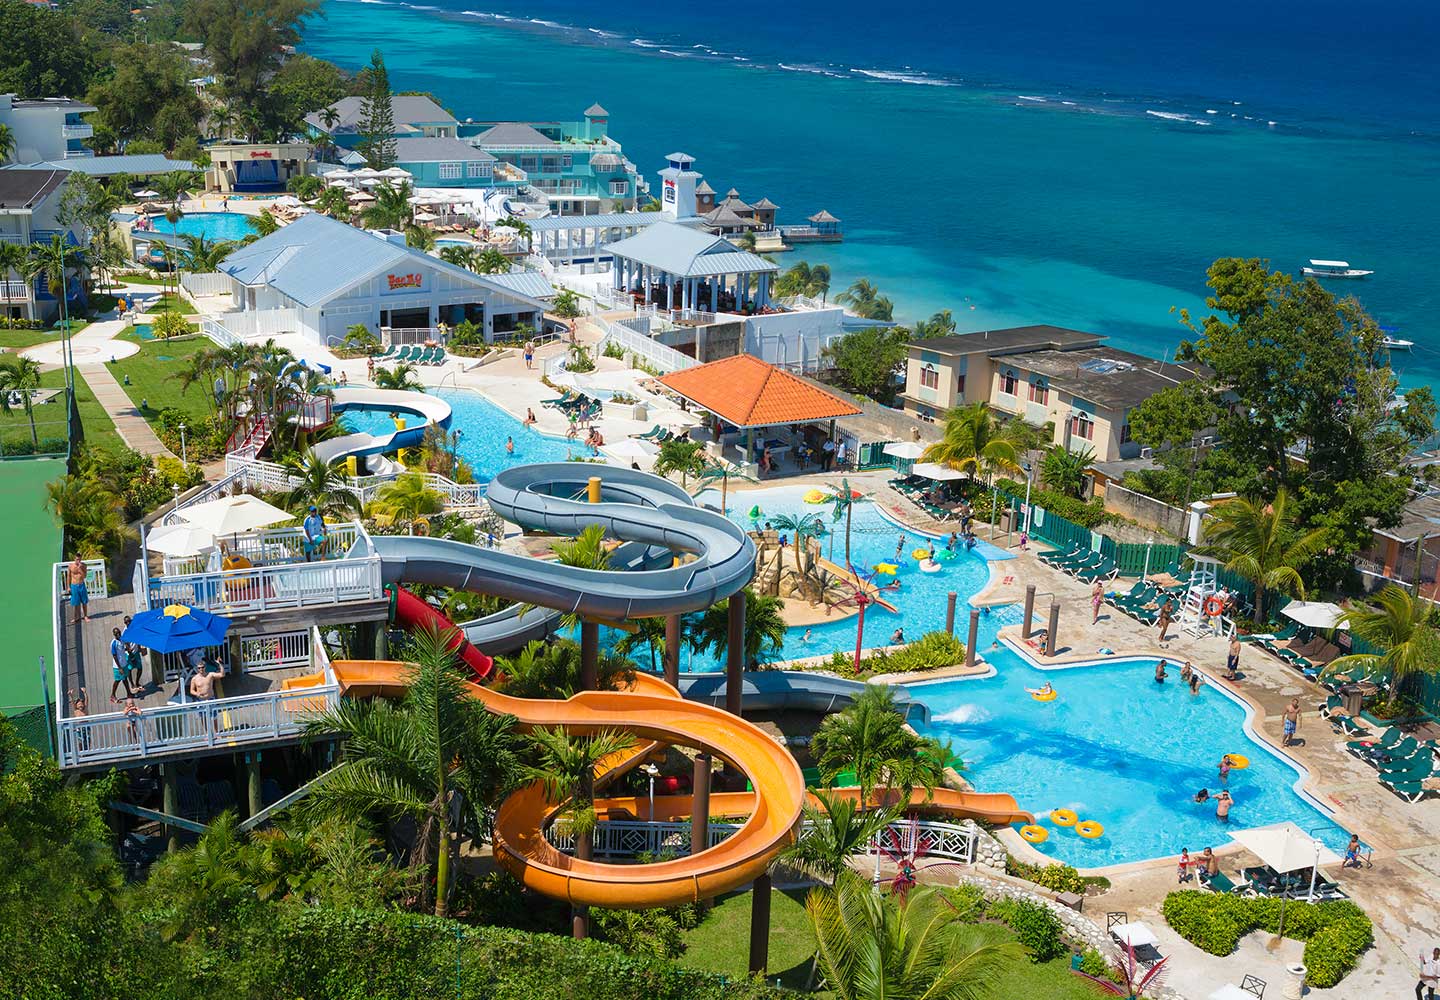 5 Best AllInclusive Resorts for Families in the Caribbean